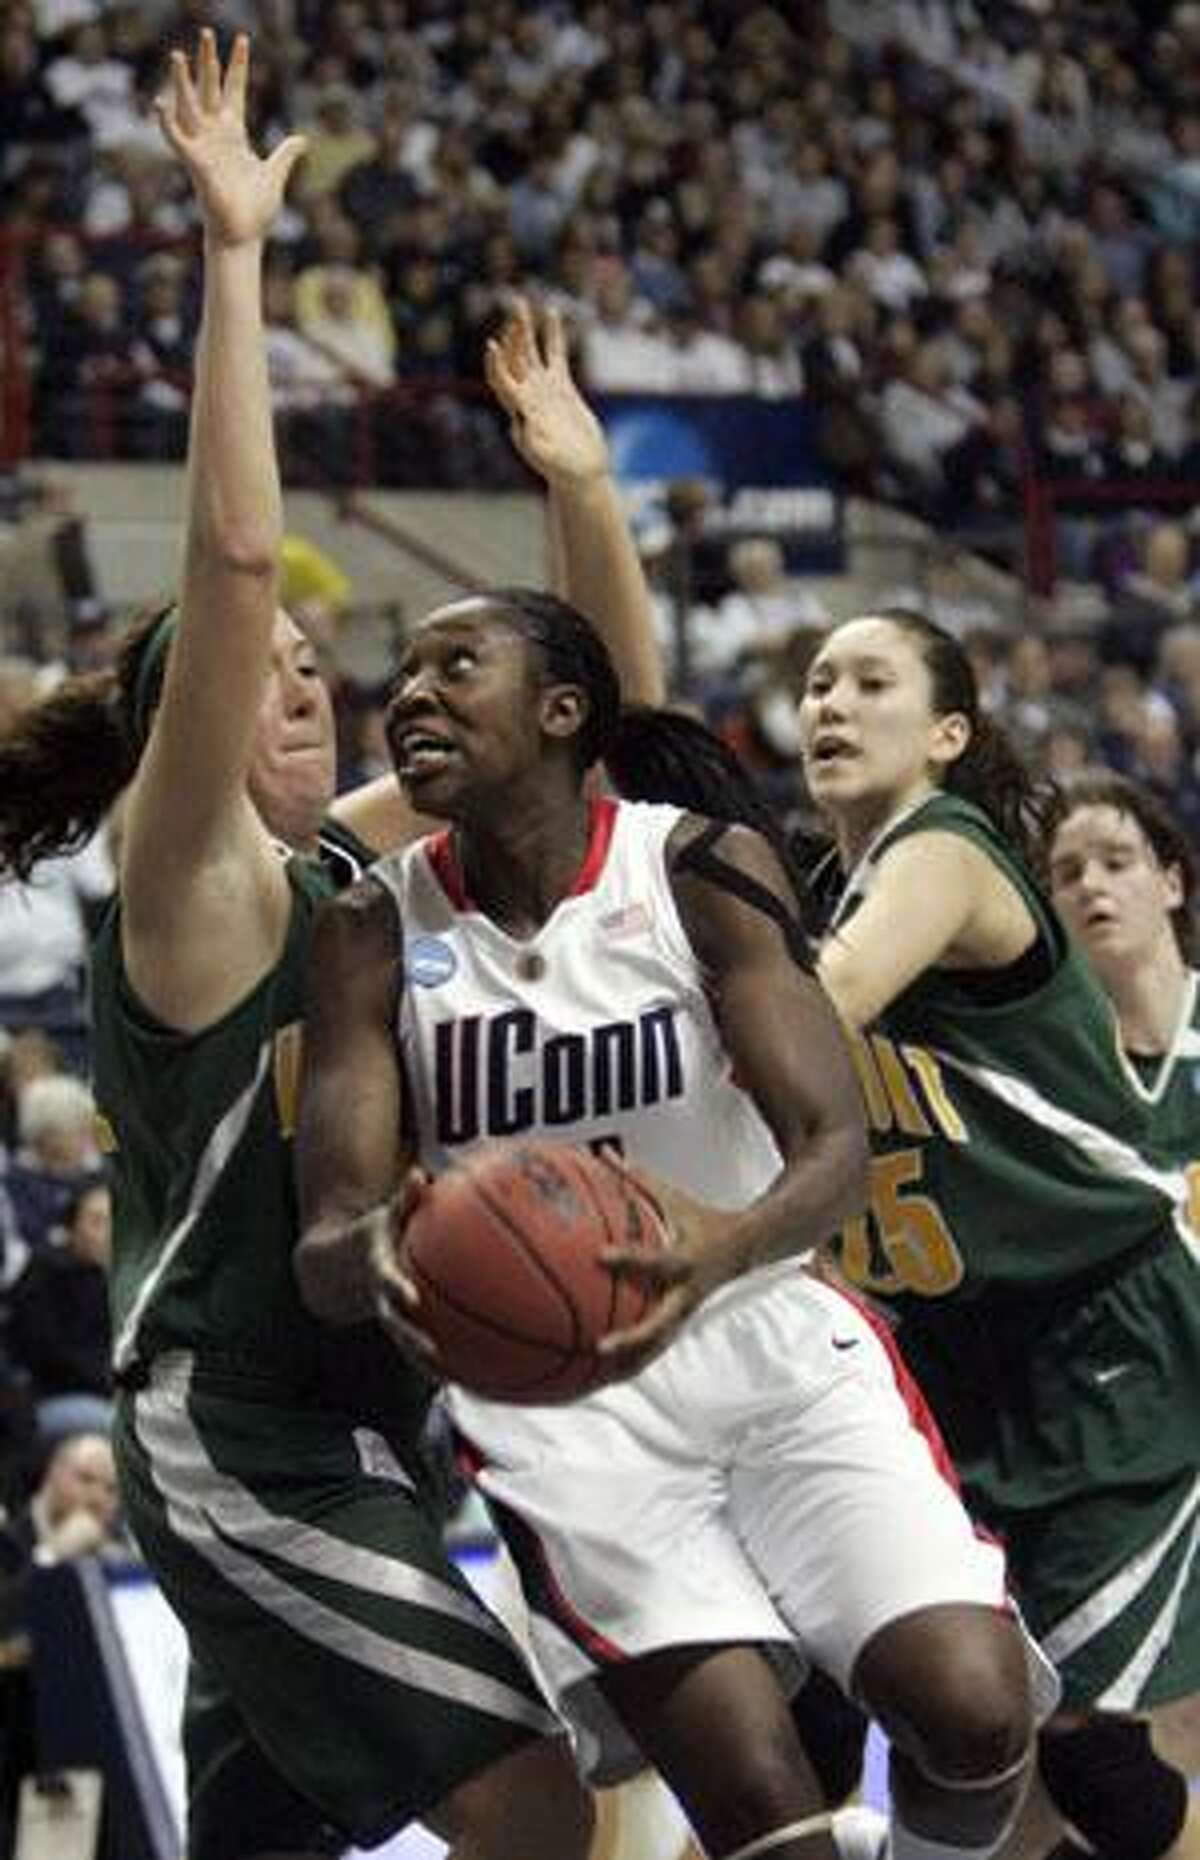 Connecticut's Tina Charles, center, drives in to the basket as Vermont's Amy Rosenkrantsz, left, and Sy Janousek, right, try to stop her during the second half of their NCAA tournament game Sunday in Storrs. UConn defeated Vermont 104-65. Charles was high-scorer for UConn and for the game with 32 points.